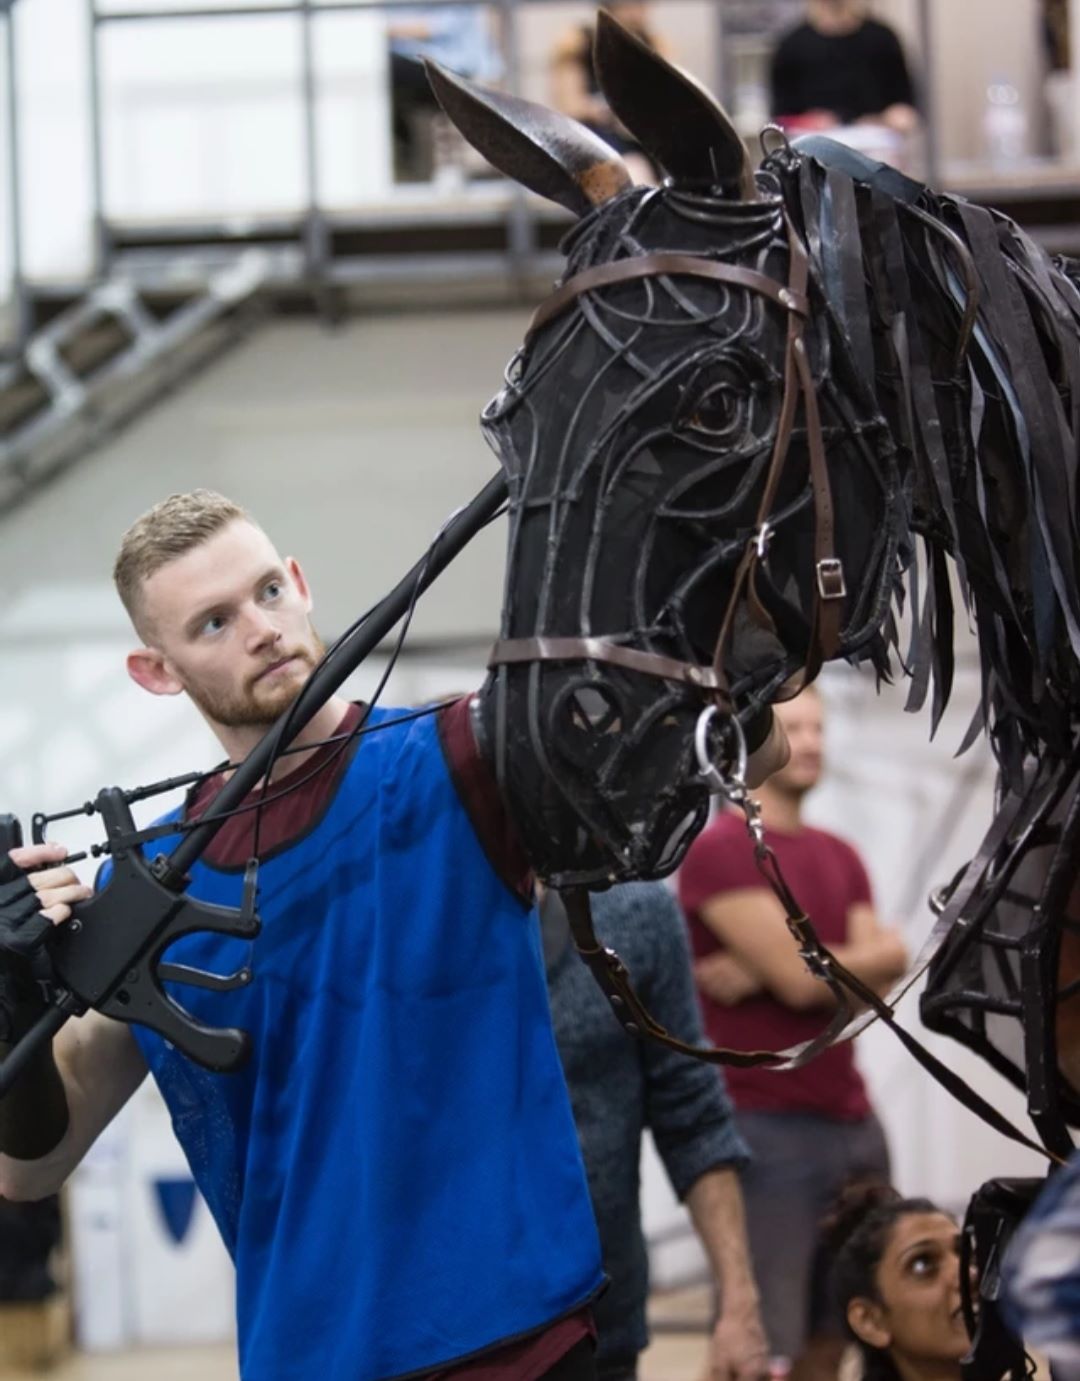 Ginger bearded man with life-size horse puppet